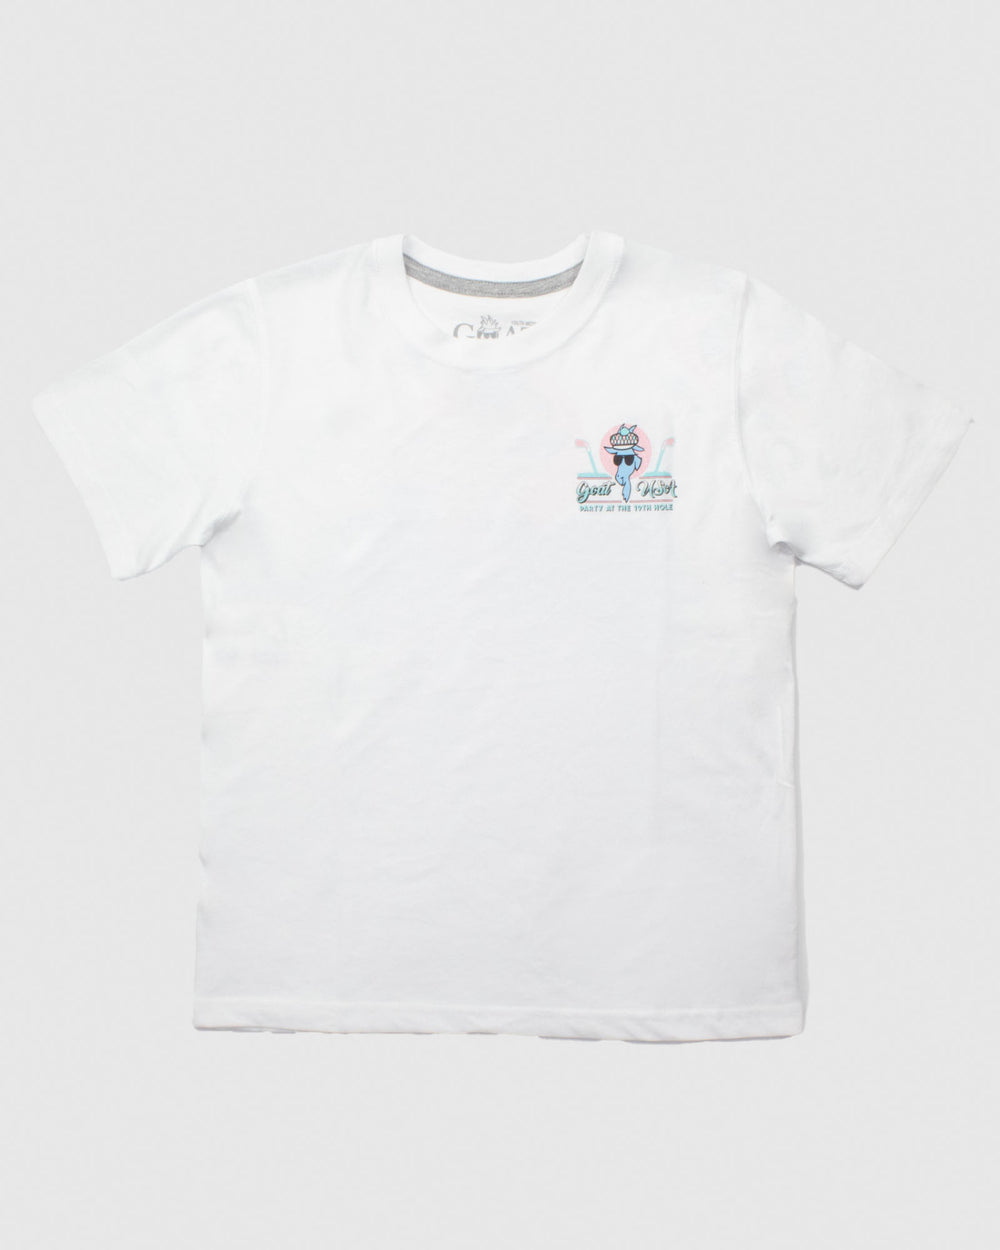 Front of white t-shirt with pink and blue golf design that reads "Party at the 19th Hole"